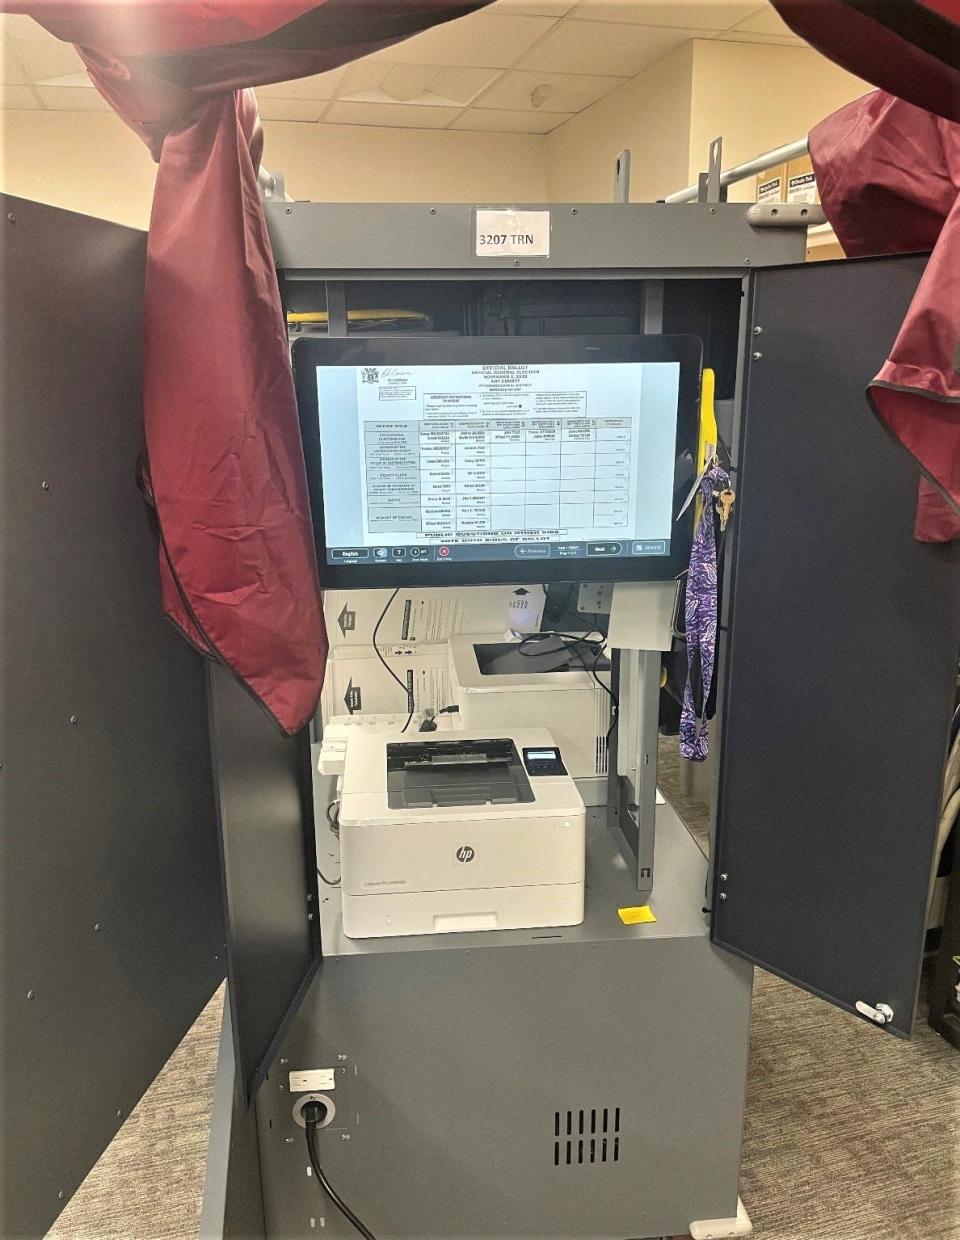 New machines are at polling stations for the June 2024 primary election in Burlington County. Votes are cast on a touch screen, with chances to change selections before printing a paper ballot. The ballot then is inserted in another machine that scans and tabulates.